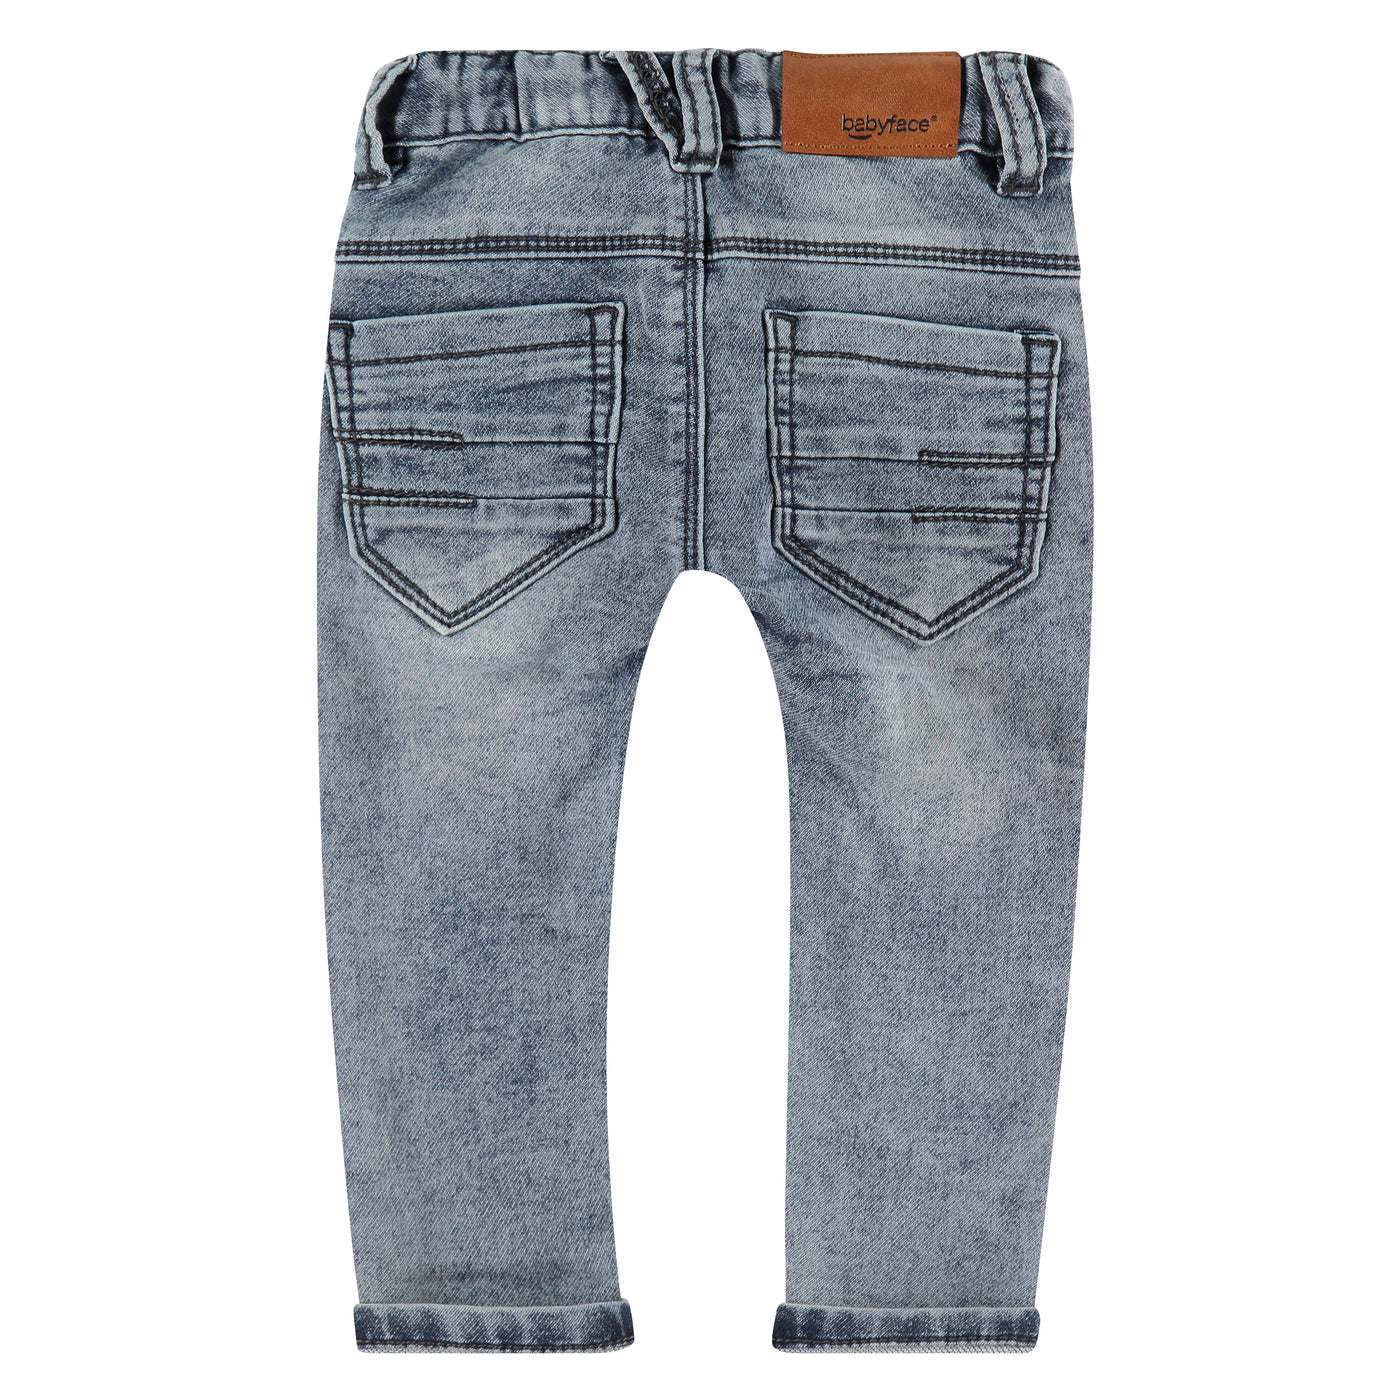 Joggs Jeans in Faded Blue